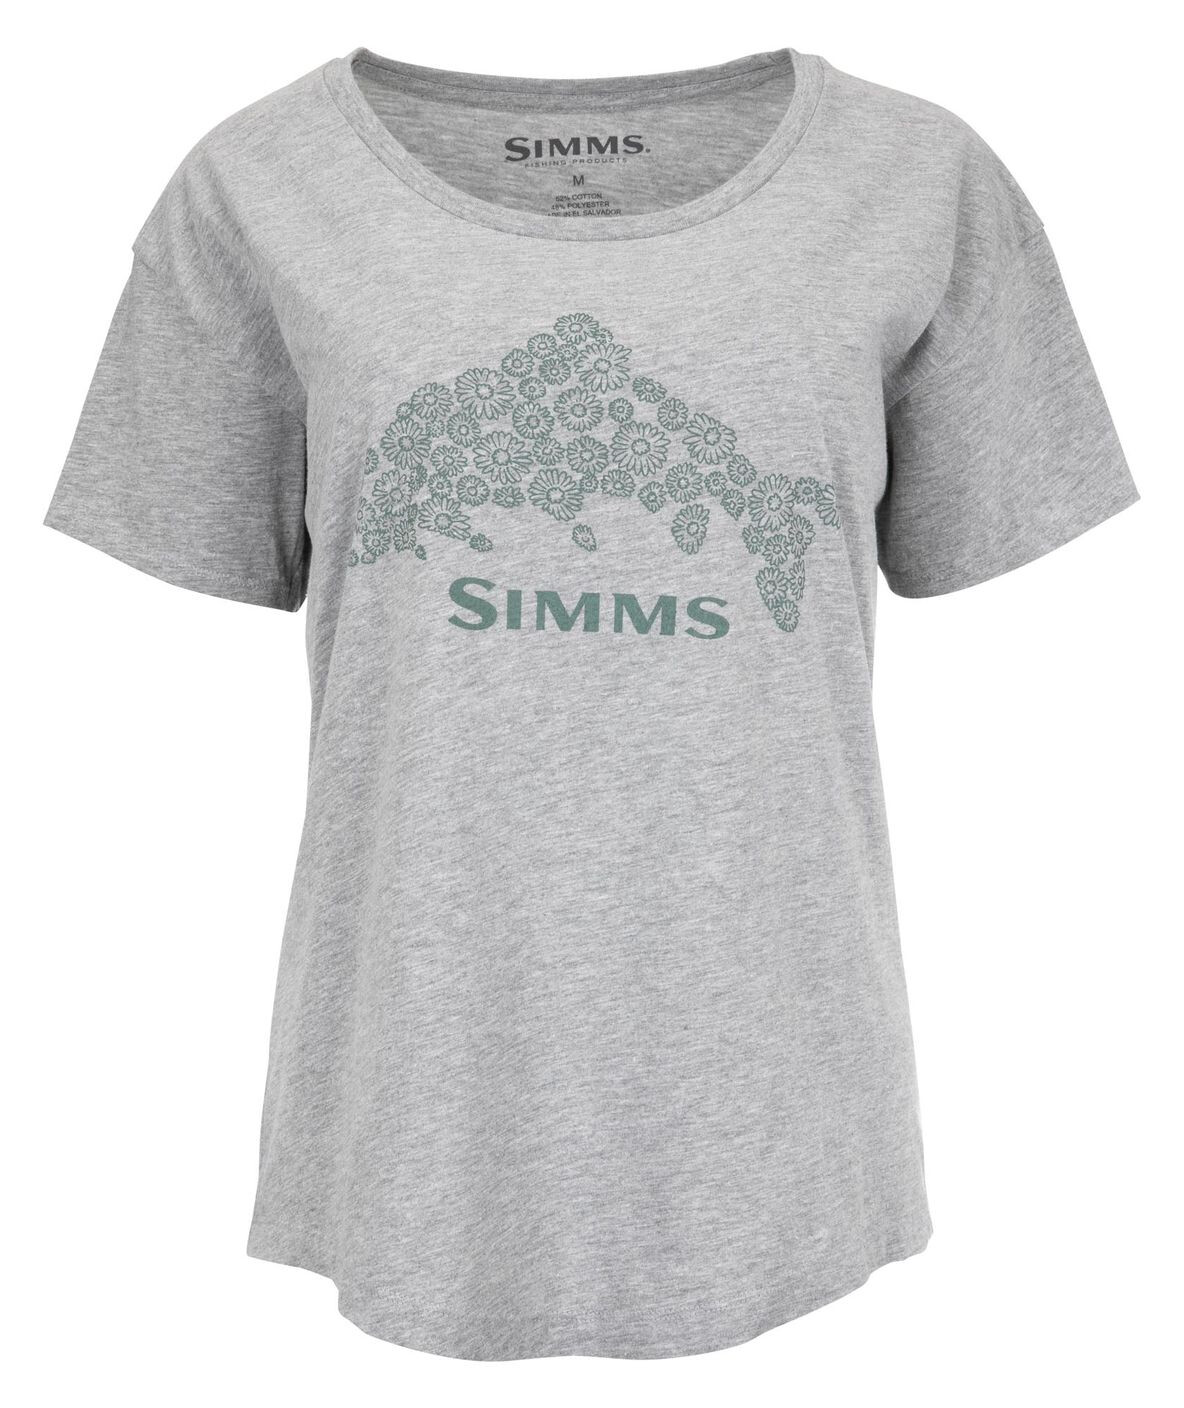 Women's T-Shirt Simms Floral Trout Grey Heather